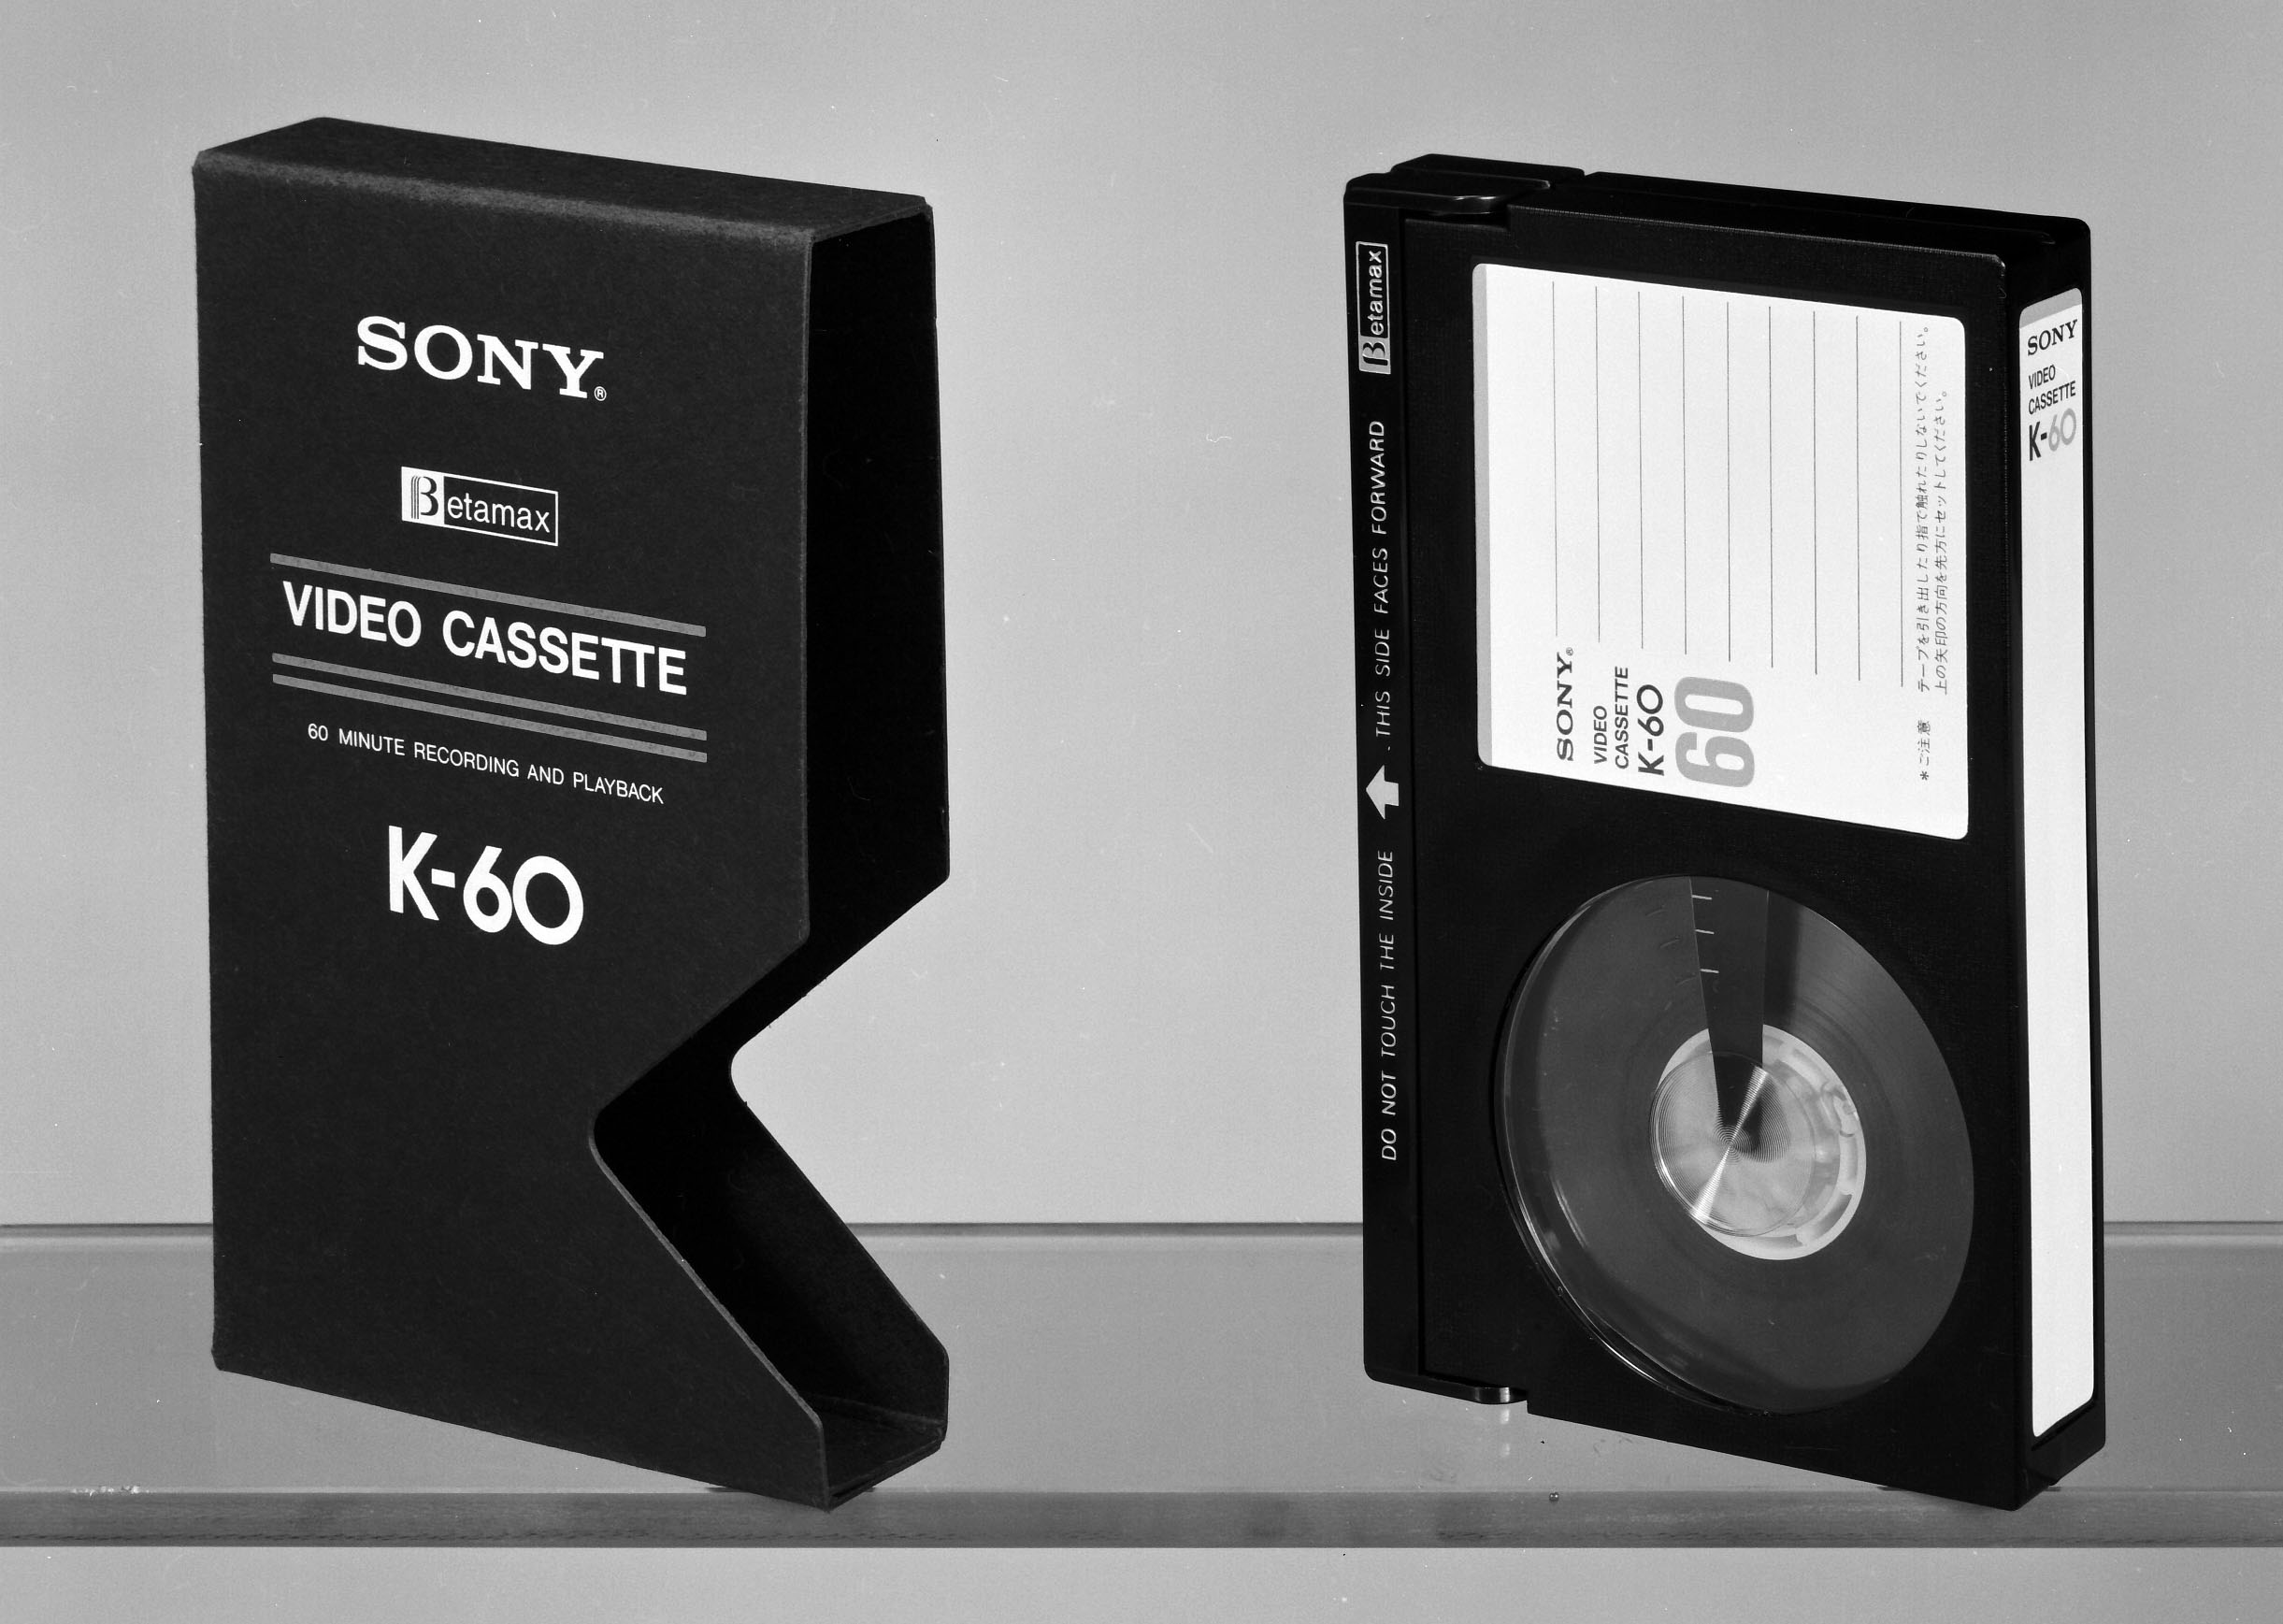 Sony Finally To Stop Making Betamax Videotapes The Japan Times